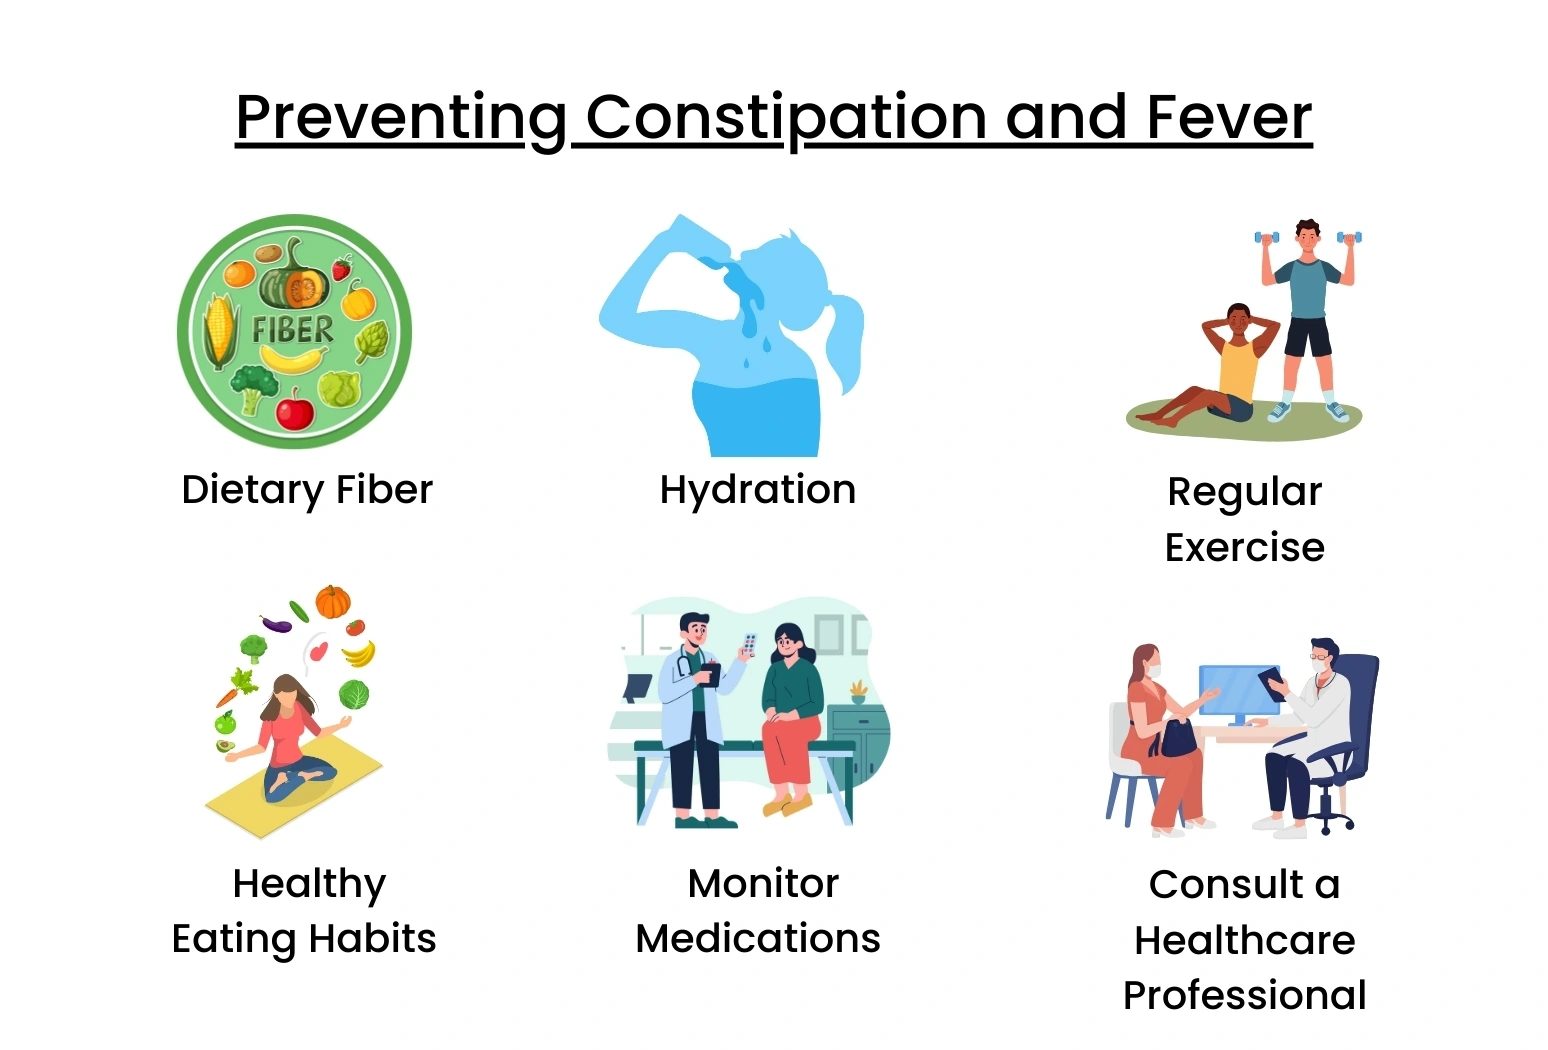 Preventing Constipation and Fever